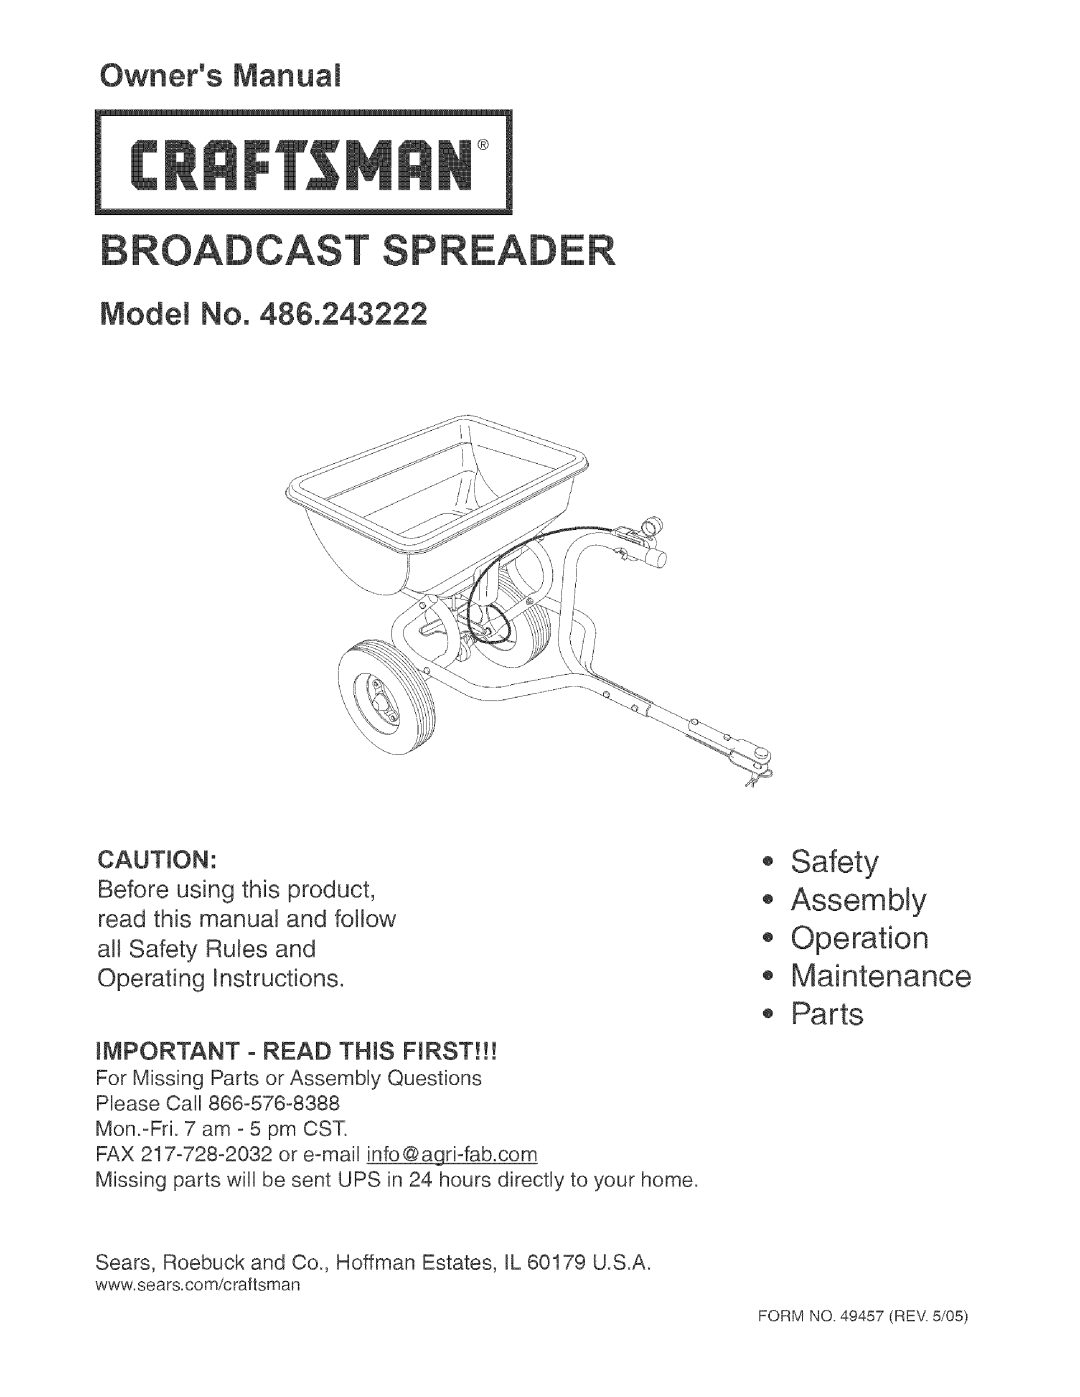 Craftsman 486.243222 owner manual Cast, Model No. 48&243222, Safety Assembly Operation Maintenance Parts 